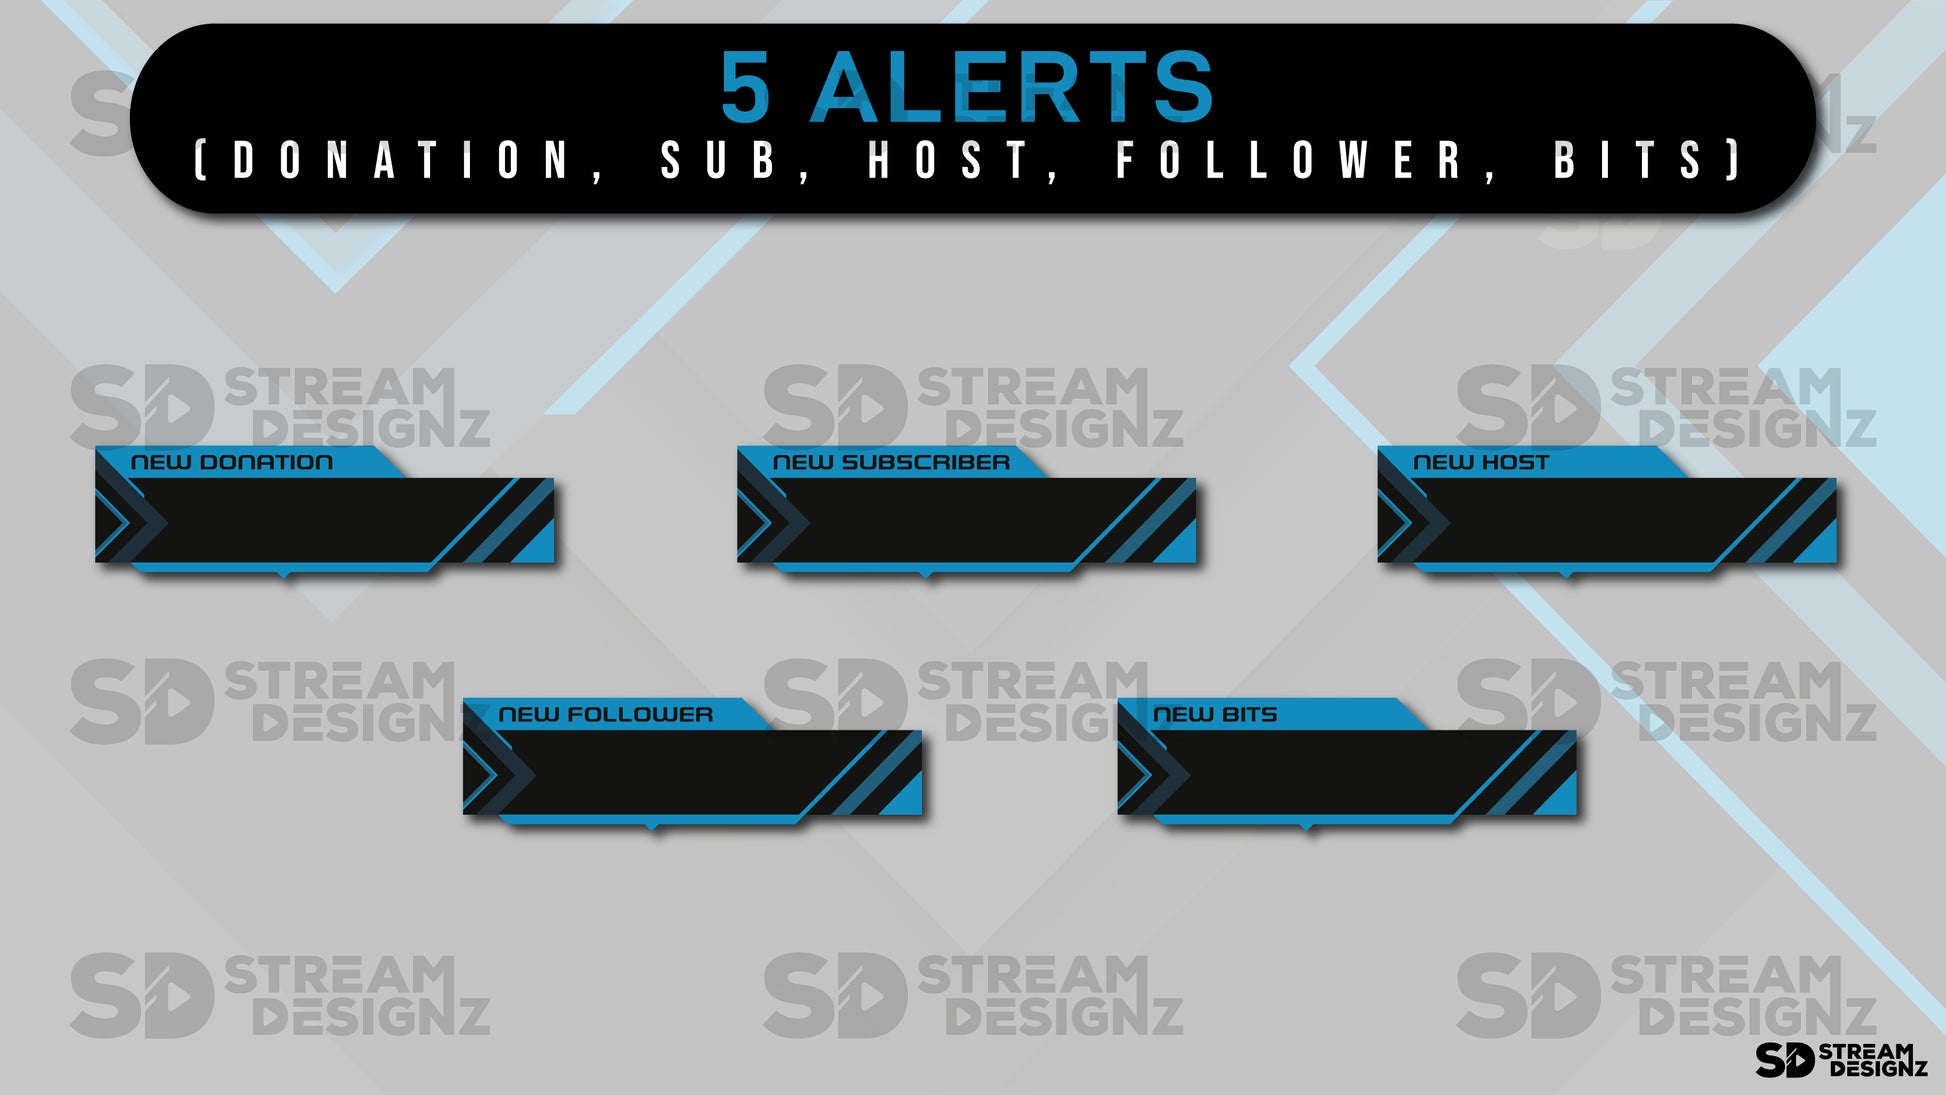 Animated stream overlay package electric alerts stream designz